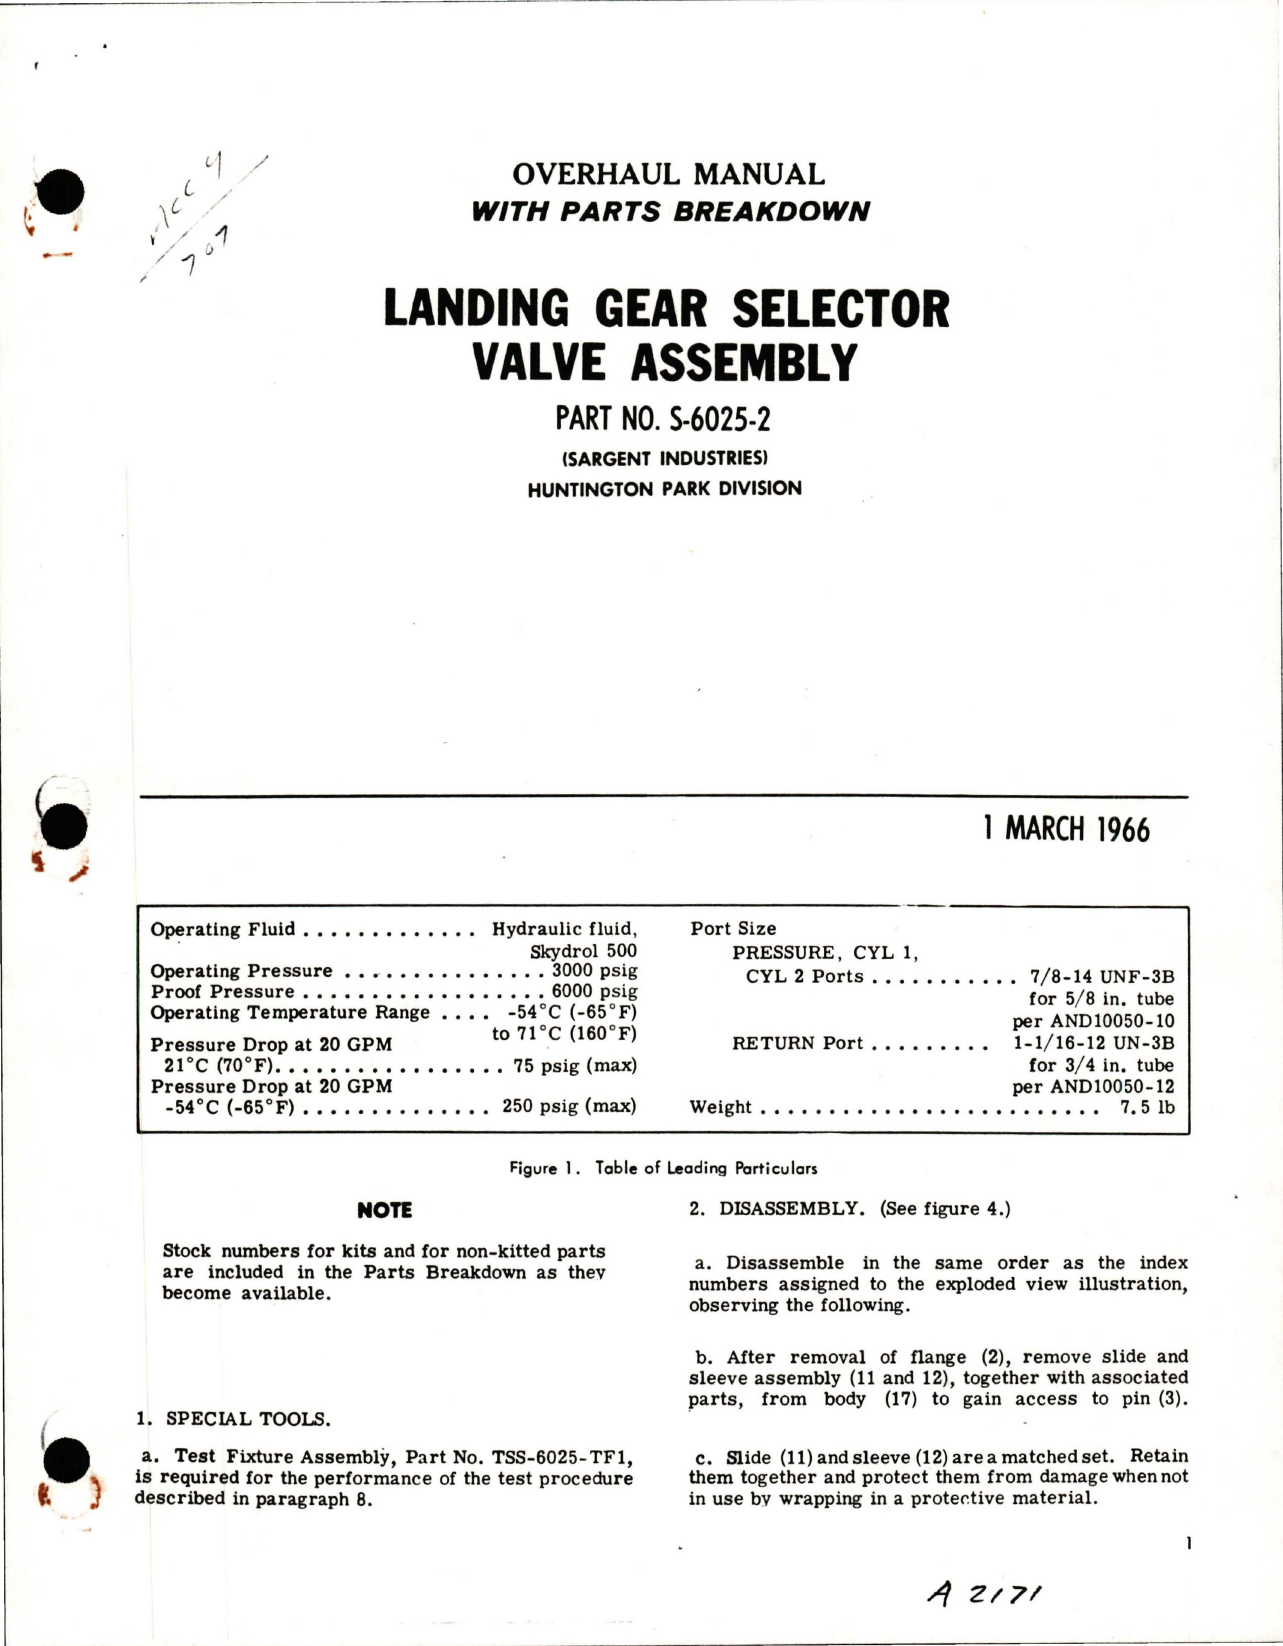 Sample page 1 from AirCorps Library document: Overhaul Manual with Parts Breakdown for Landing Gear Selector Valve Assembly - Part S-6025-2